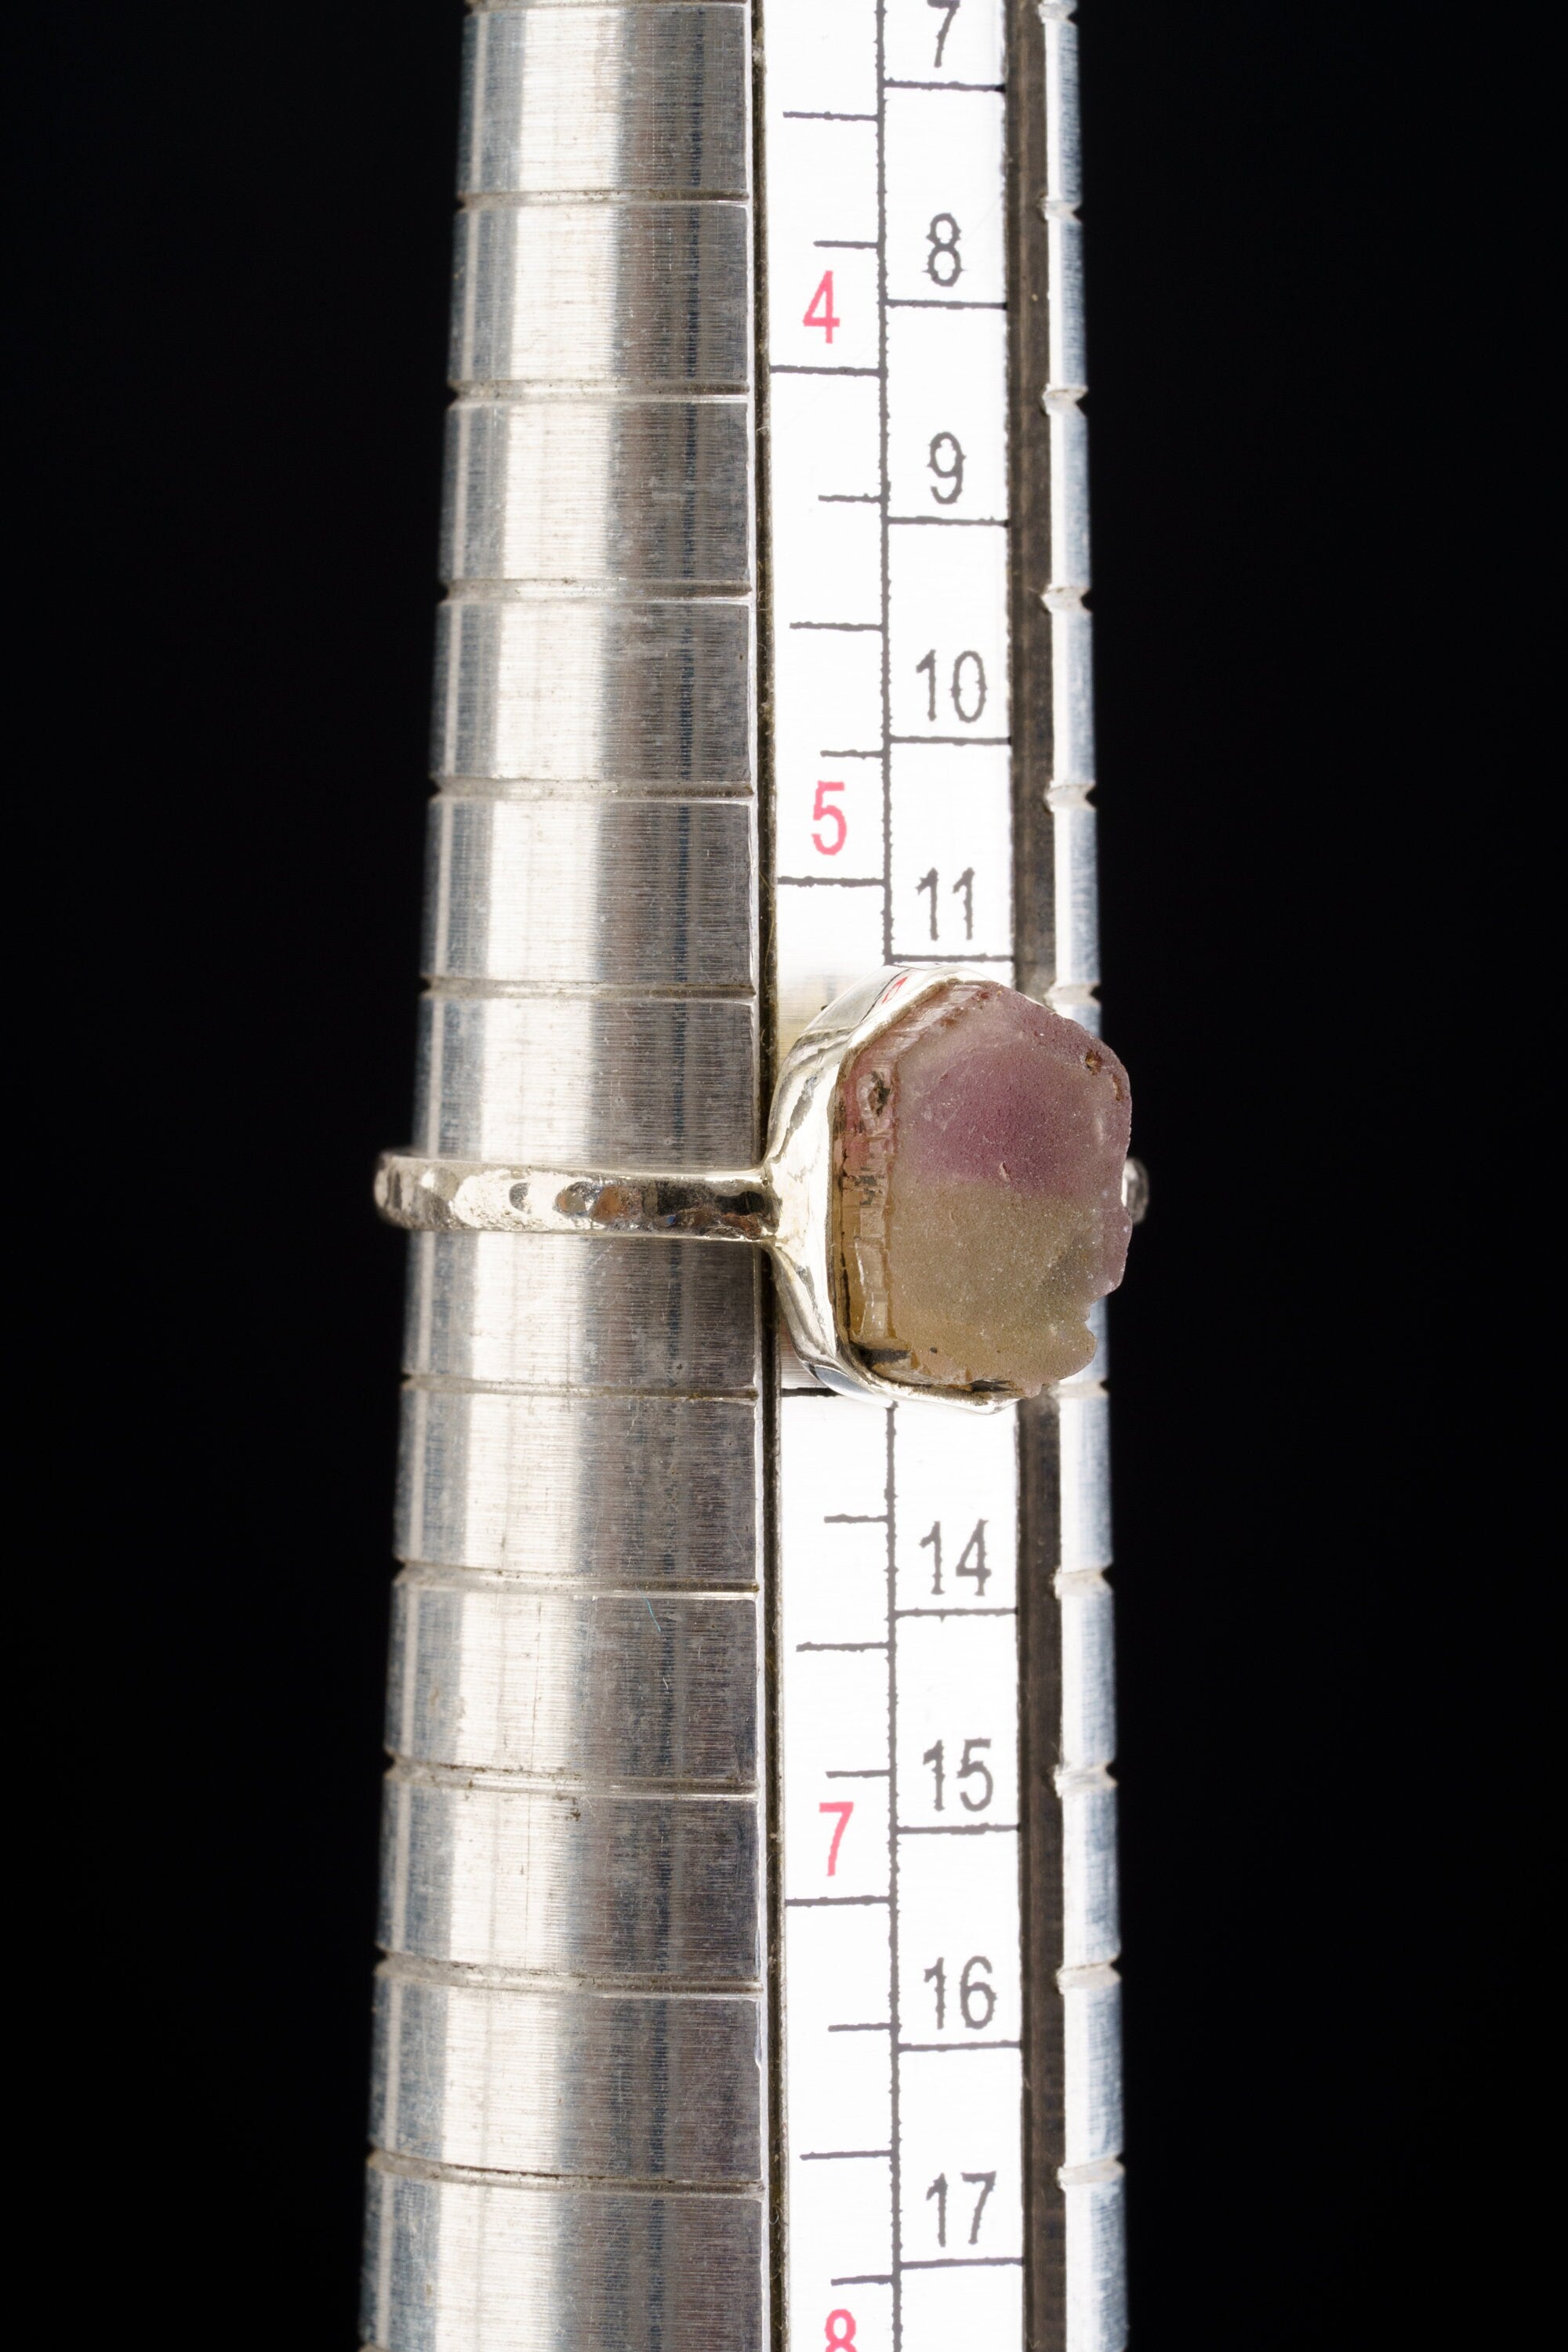 Bicolour Pink gem Tourmaline - Stack Crystal Ring - Size 5 3/4 US - 925 Sterling Silver - Thin Band Hammer Textured